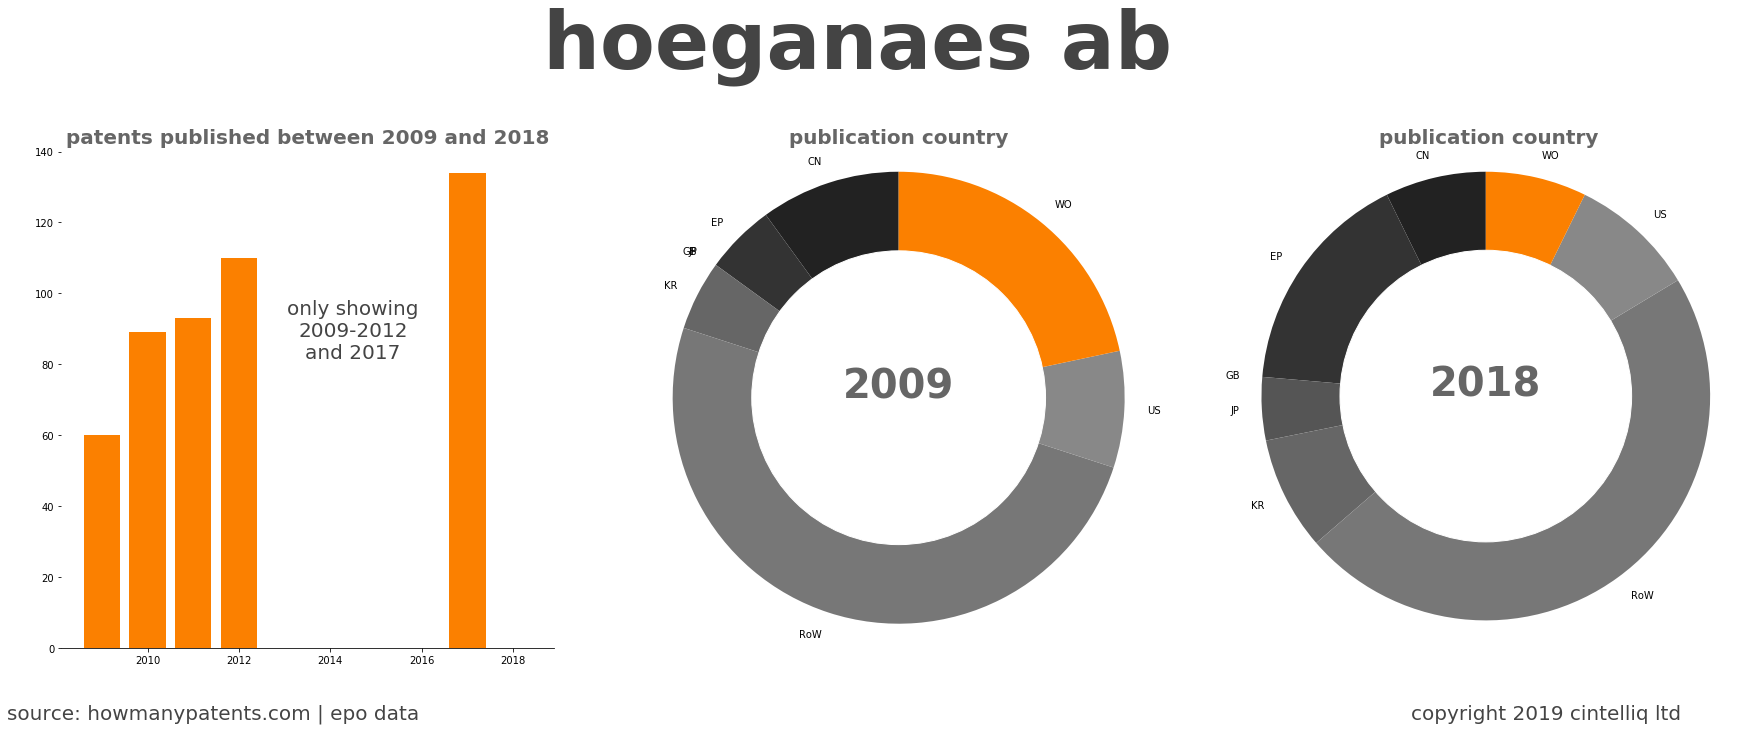 summary of patents for Hoeganaes Ab 